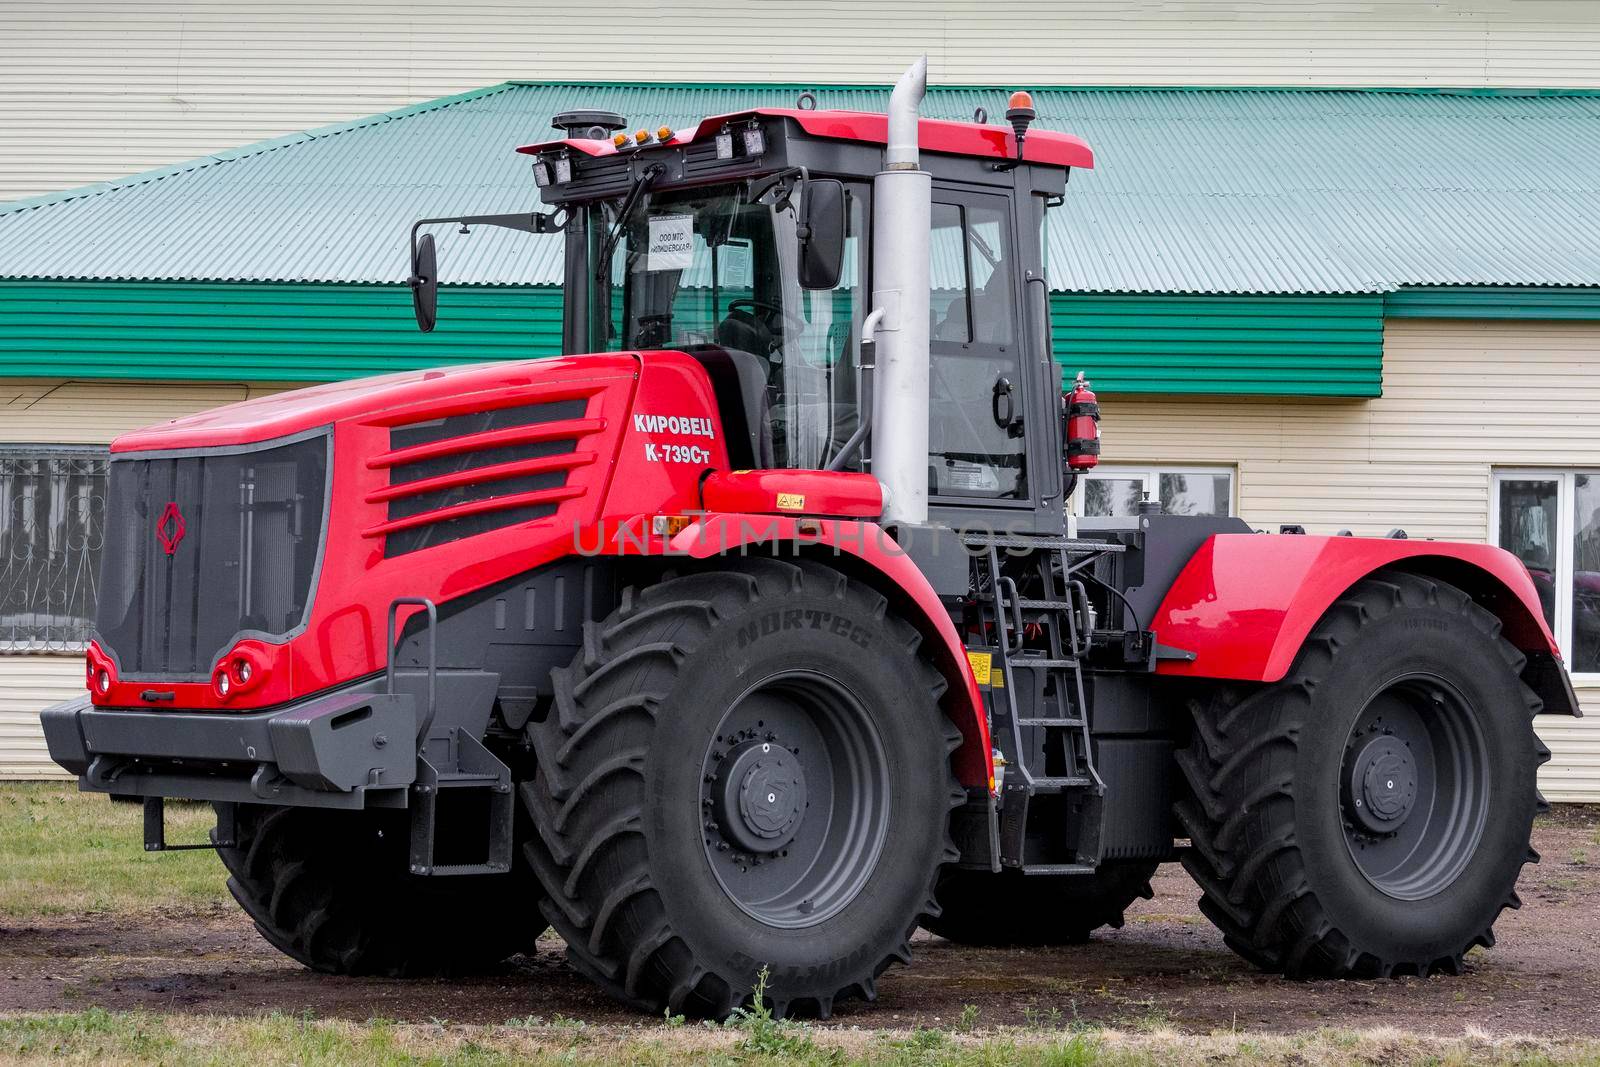 Powerful red tractors brand Kirovets, Bashkortostan, Russia - 19 June, 2022. by Essffes